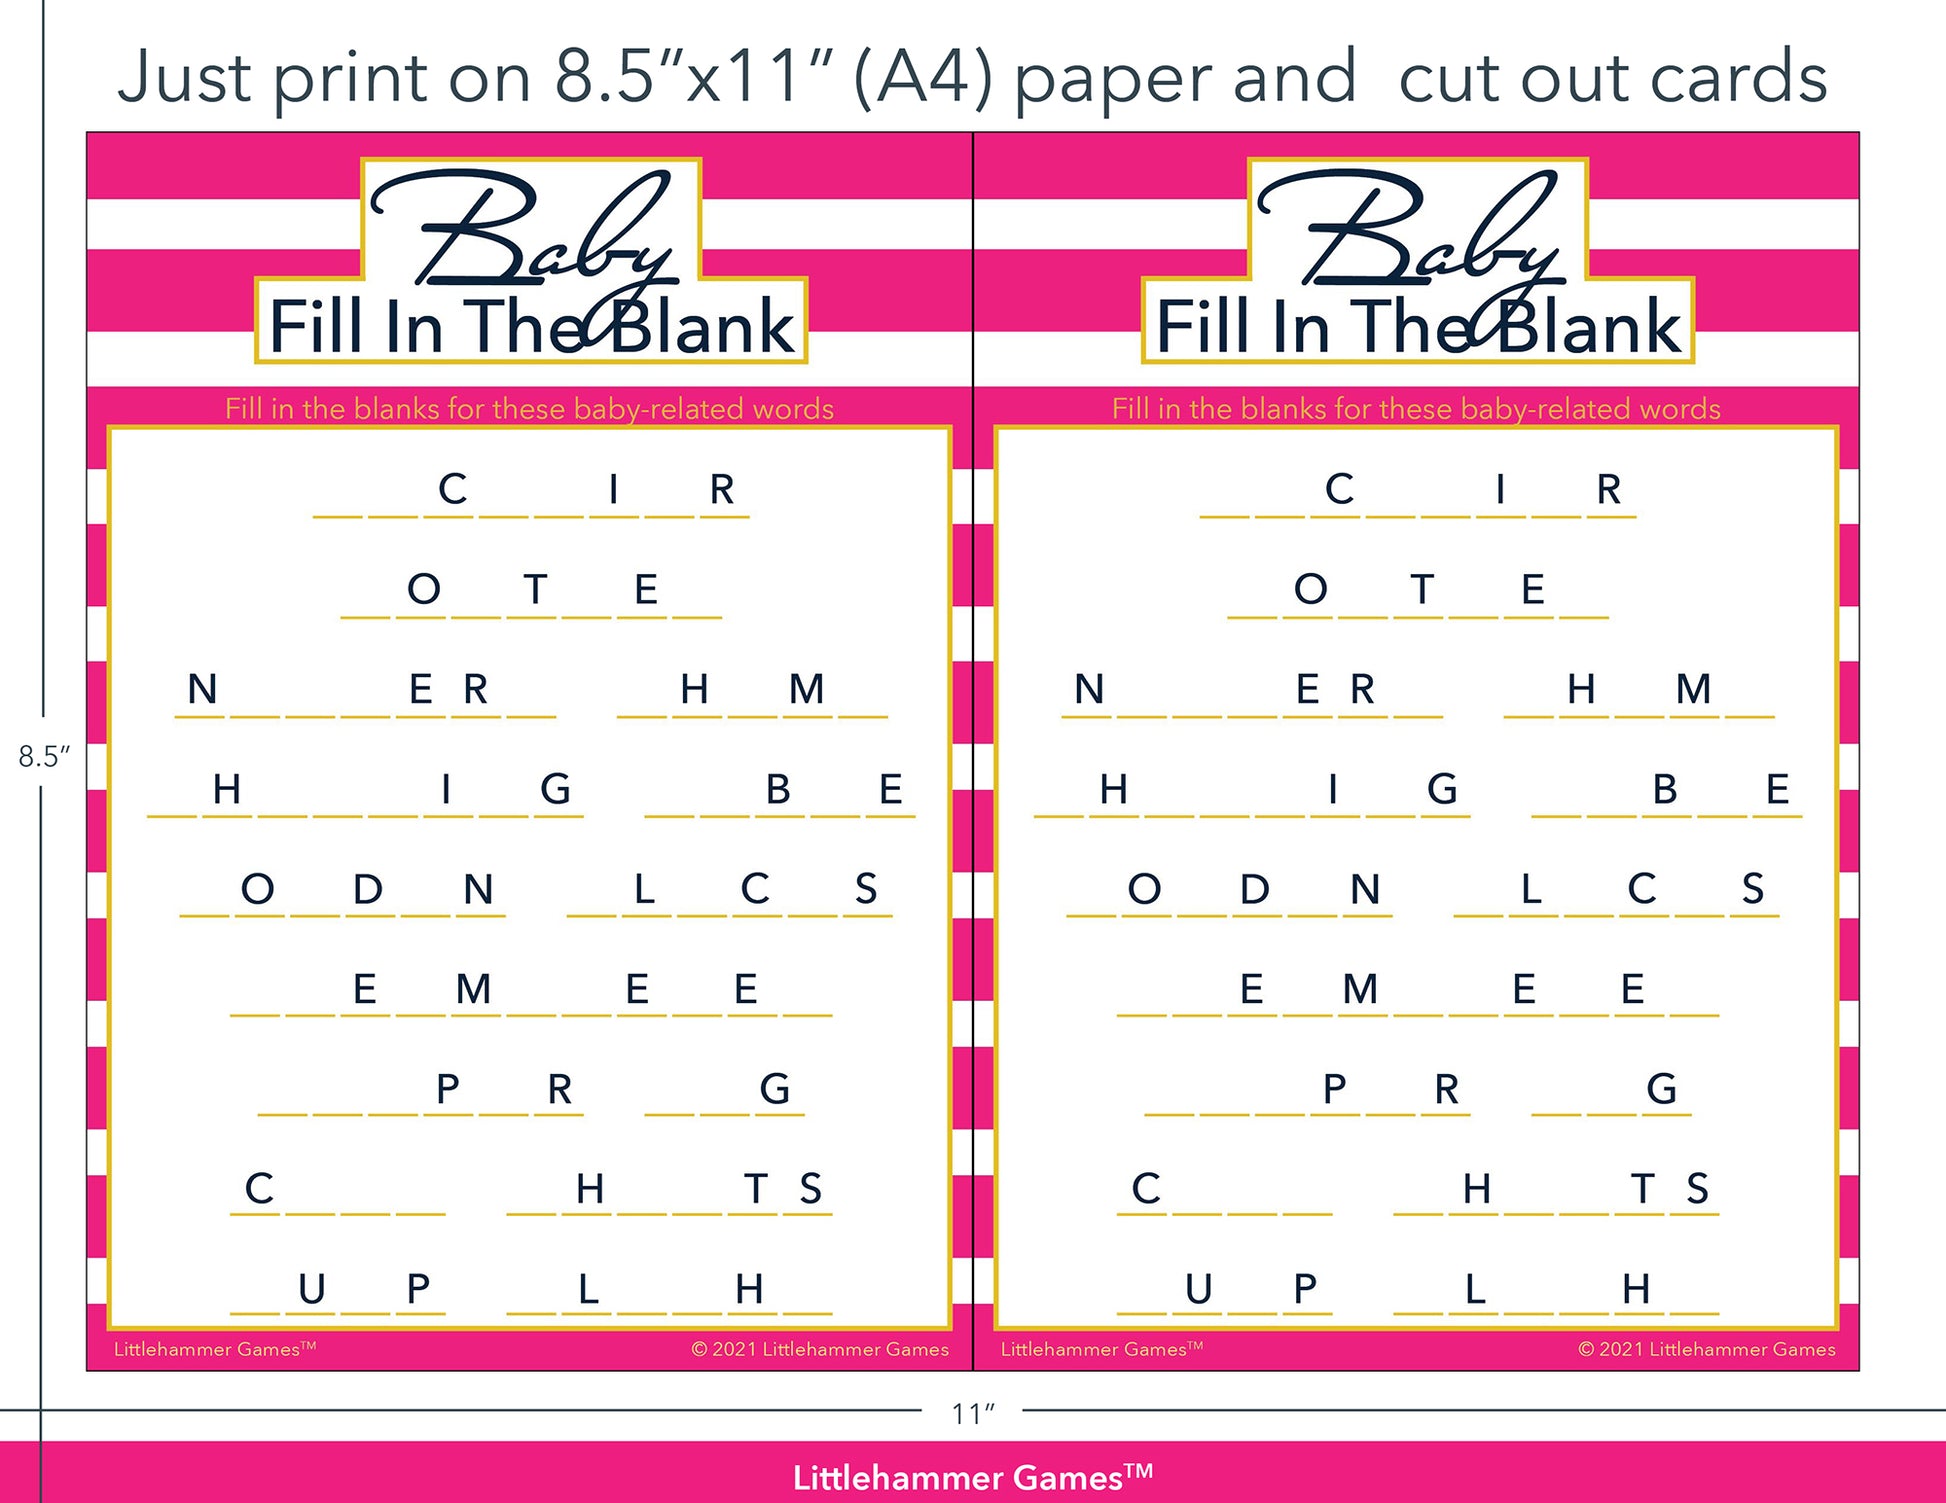 Baby Fill in the Blank hot pink-striped game cards with printing instructions